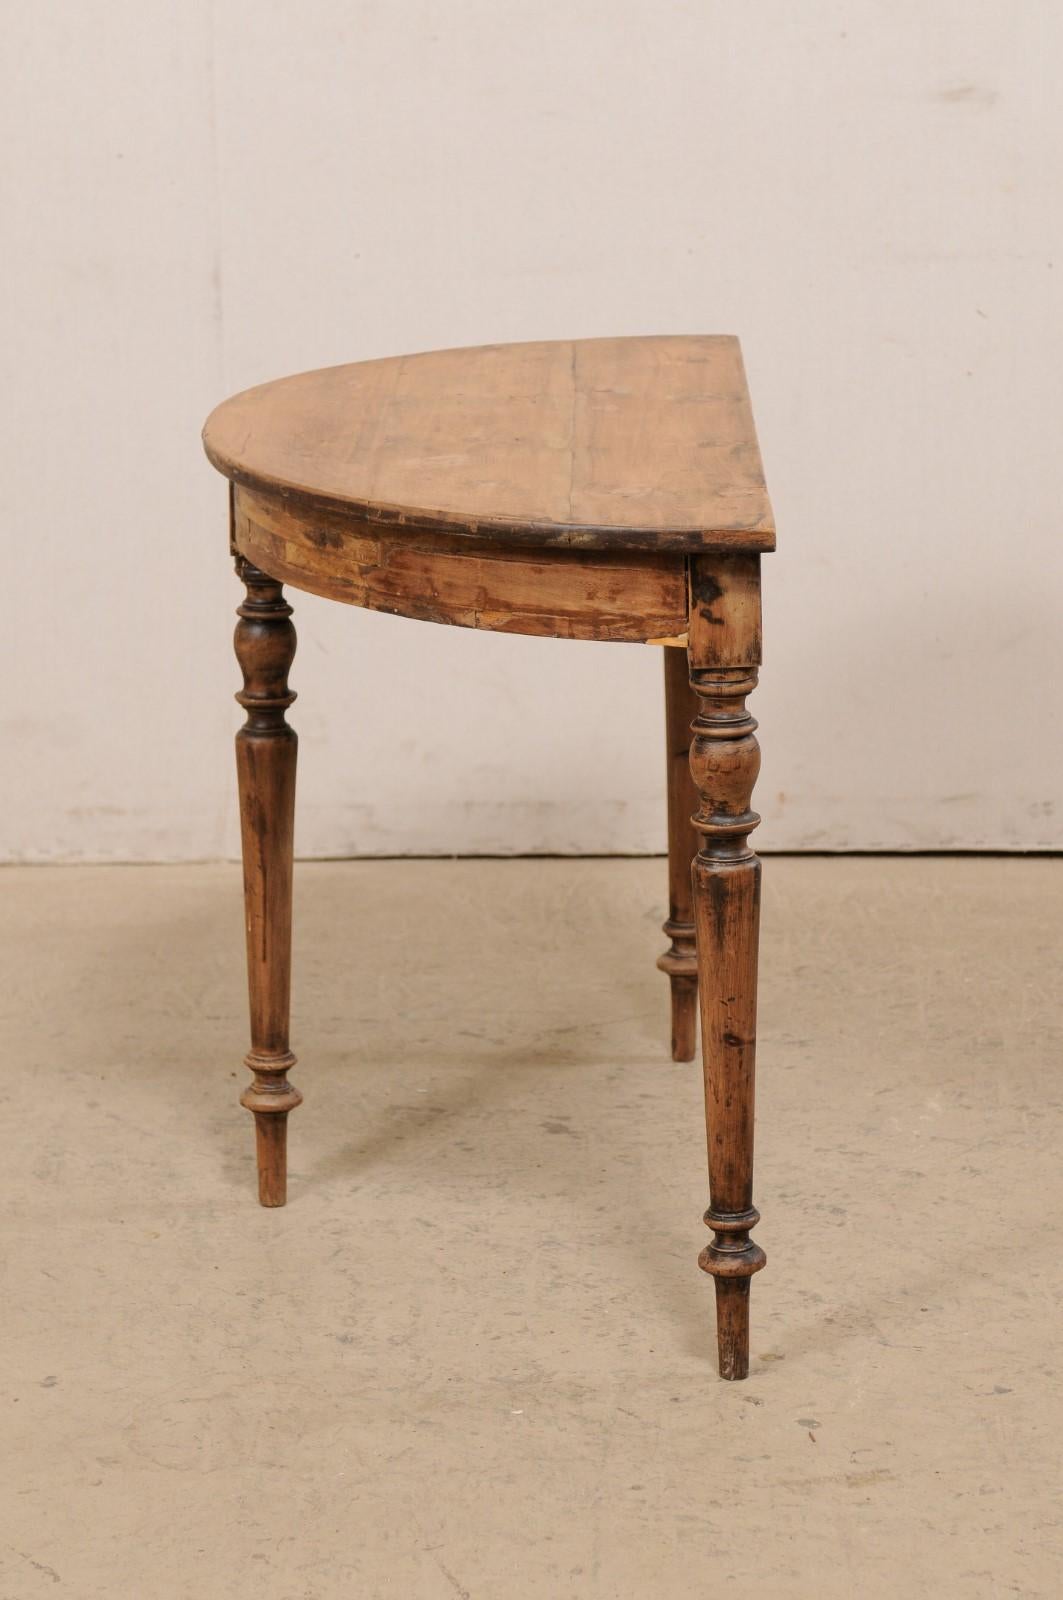 Swedish Demi-Lune Console Table with Rounded Apron and Turned Legs, 19th C.  5